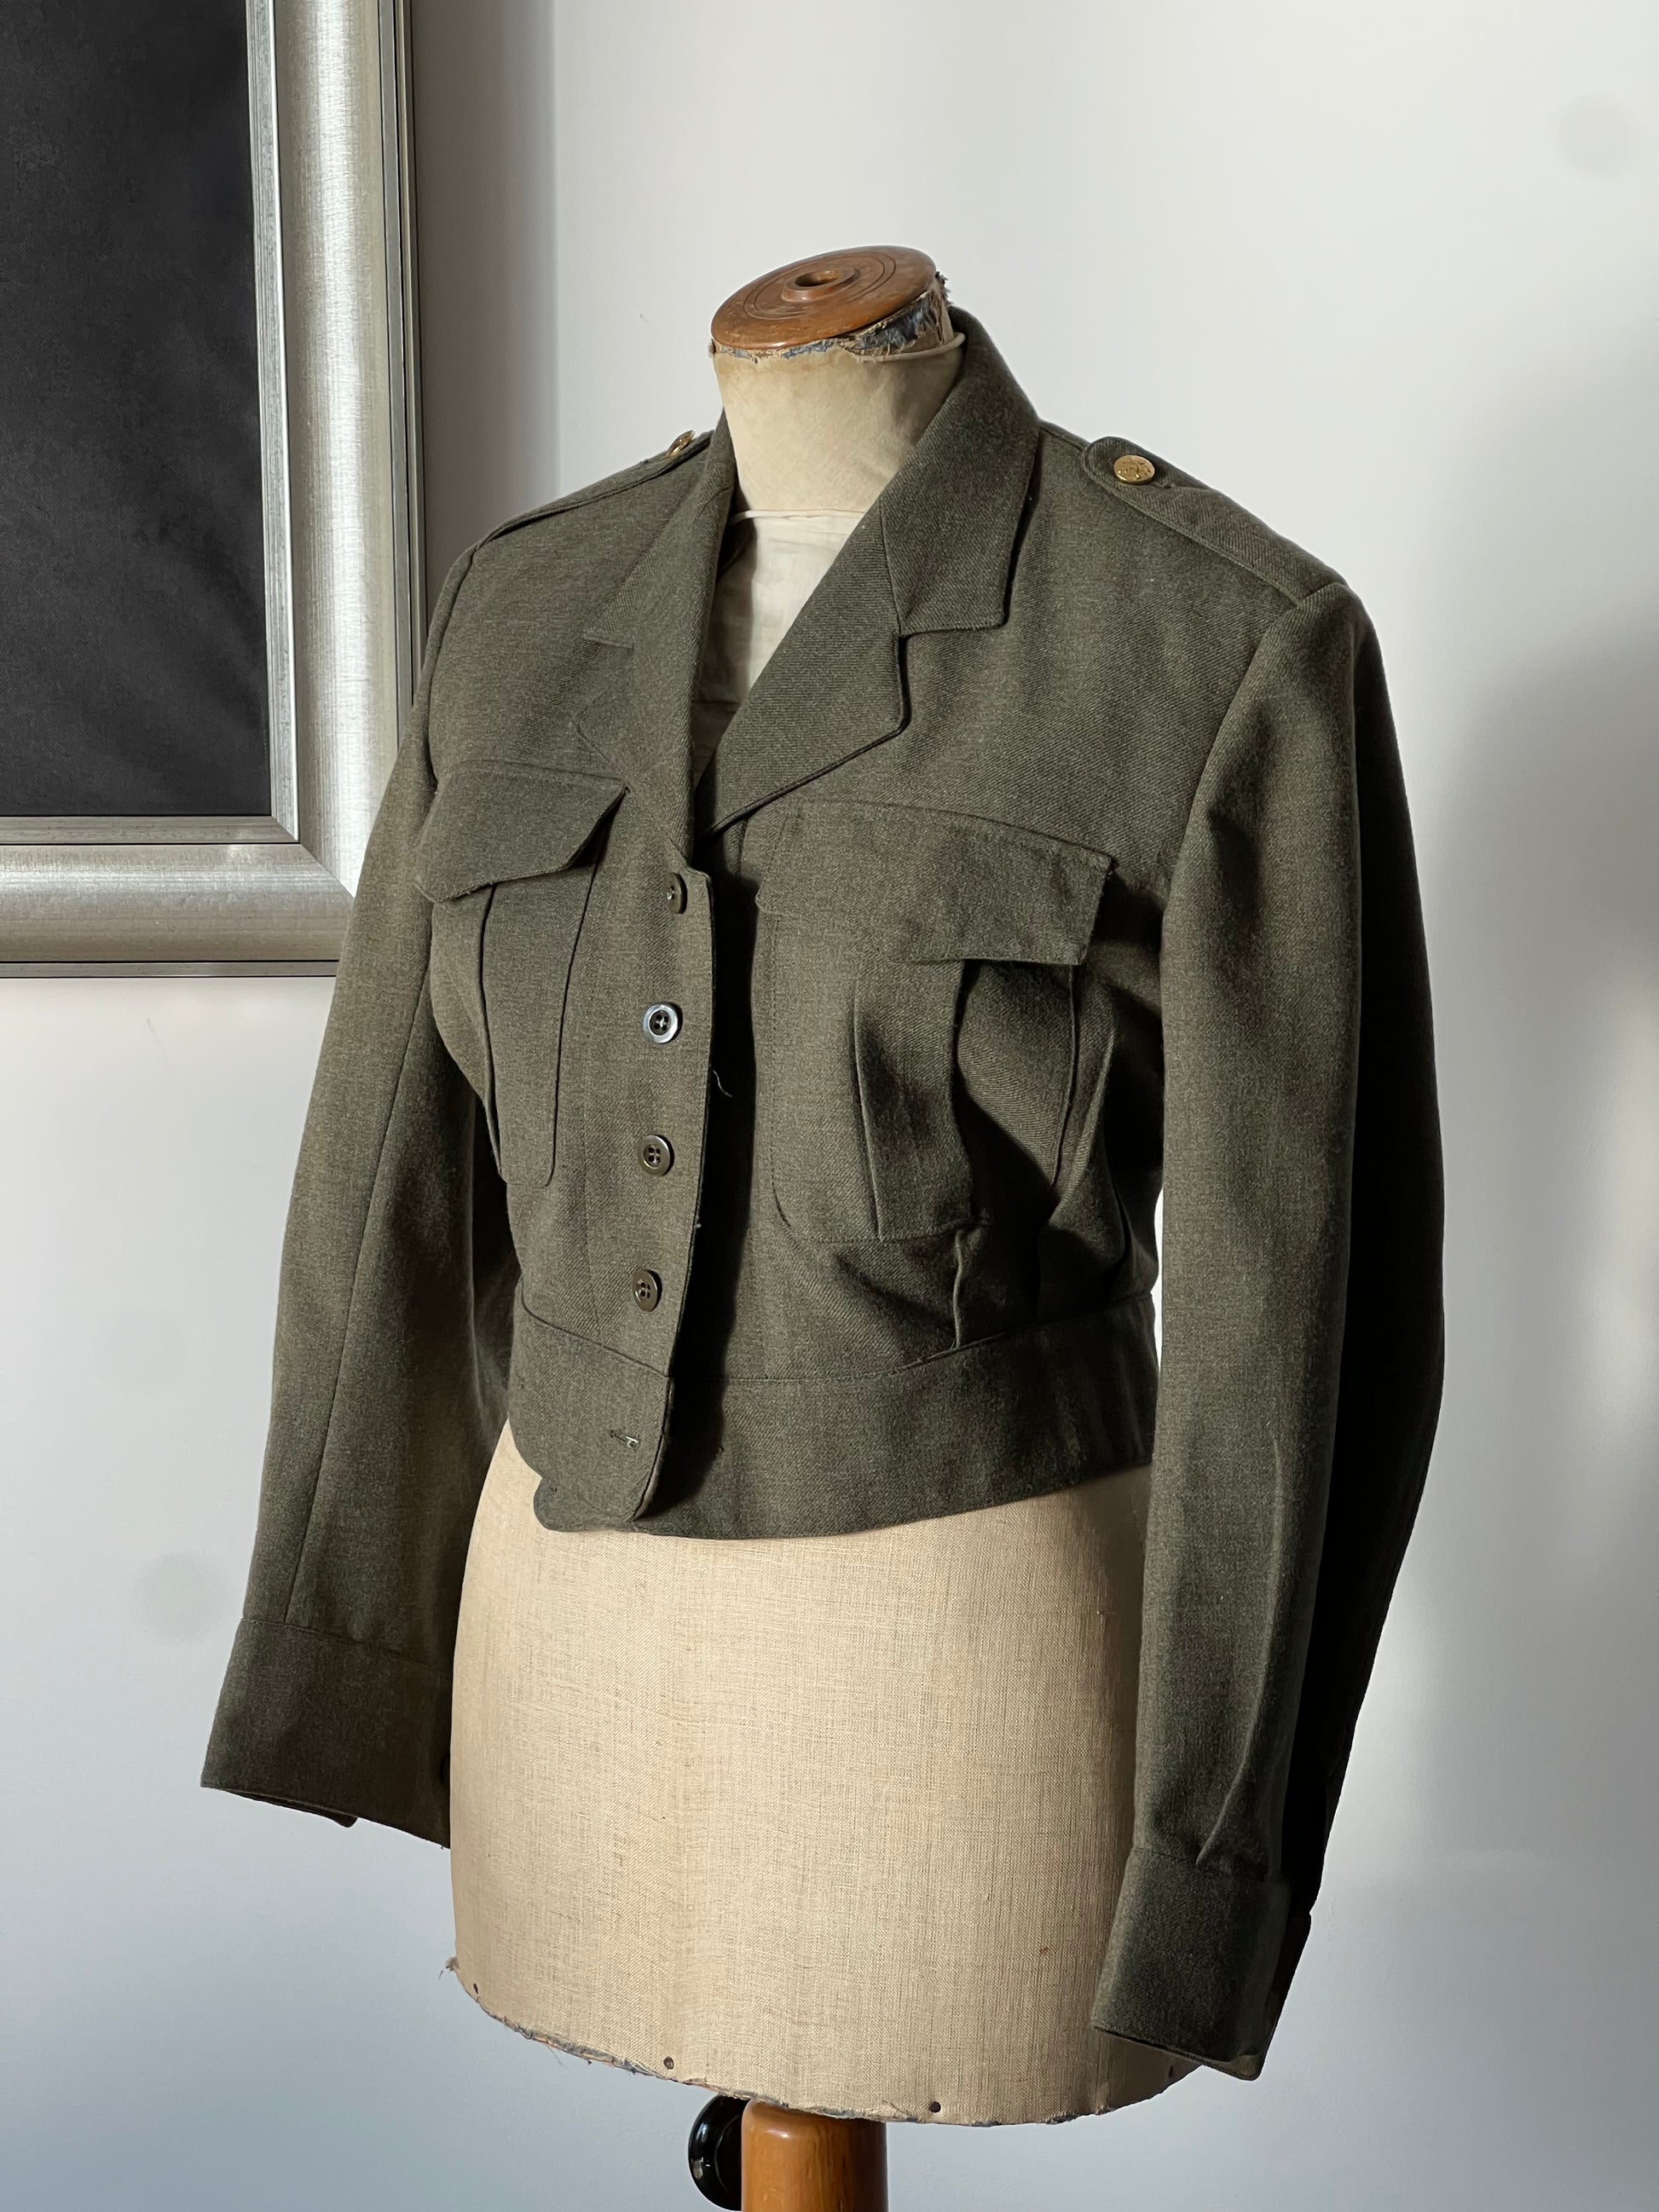 Army women’s jacket on a manequin